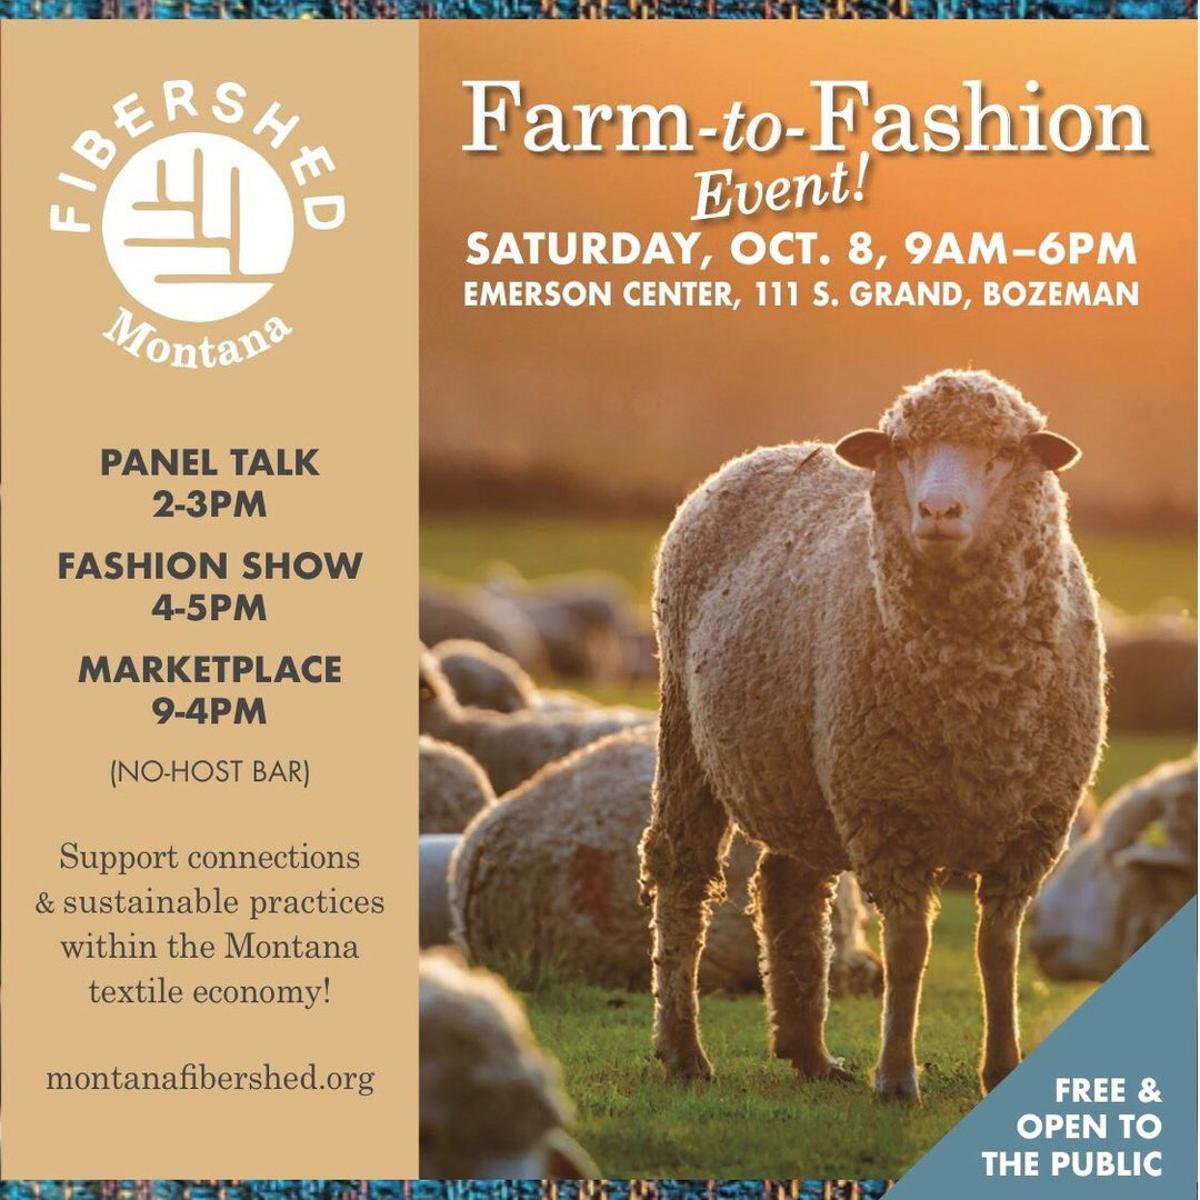 Montana-made fiber to be celebrated at Farm-to-Fashion marketplace and show  | News 